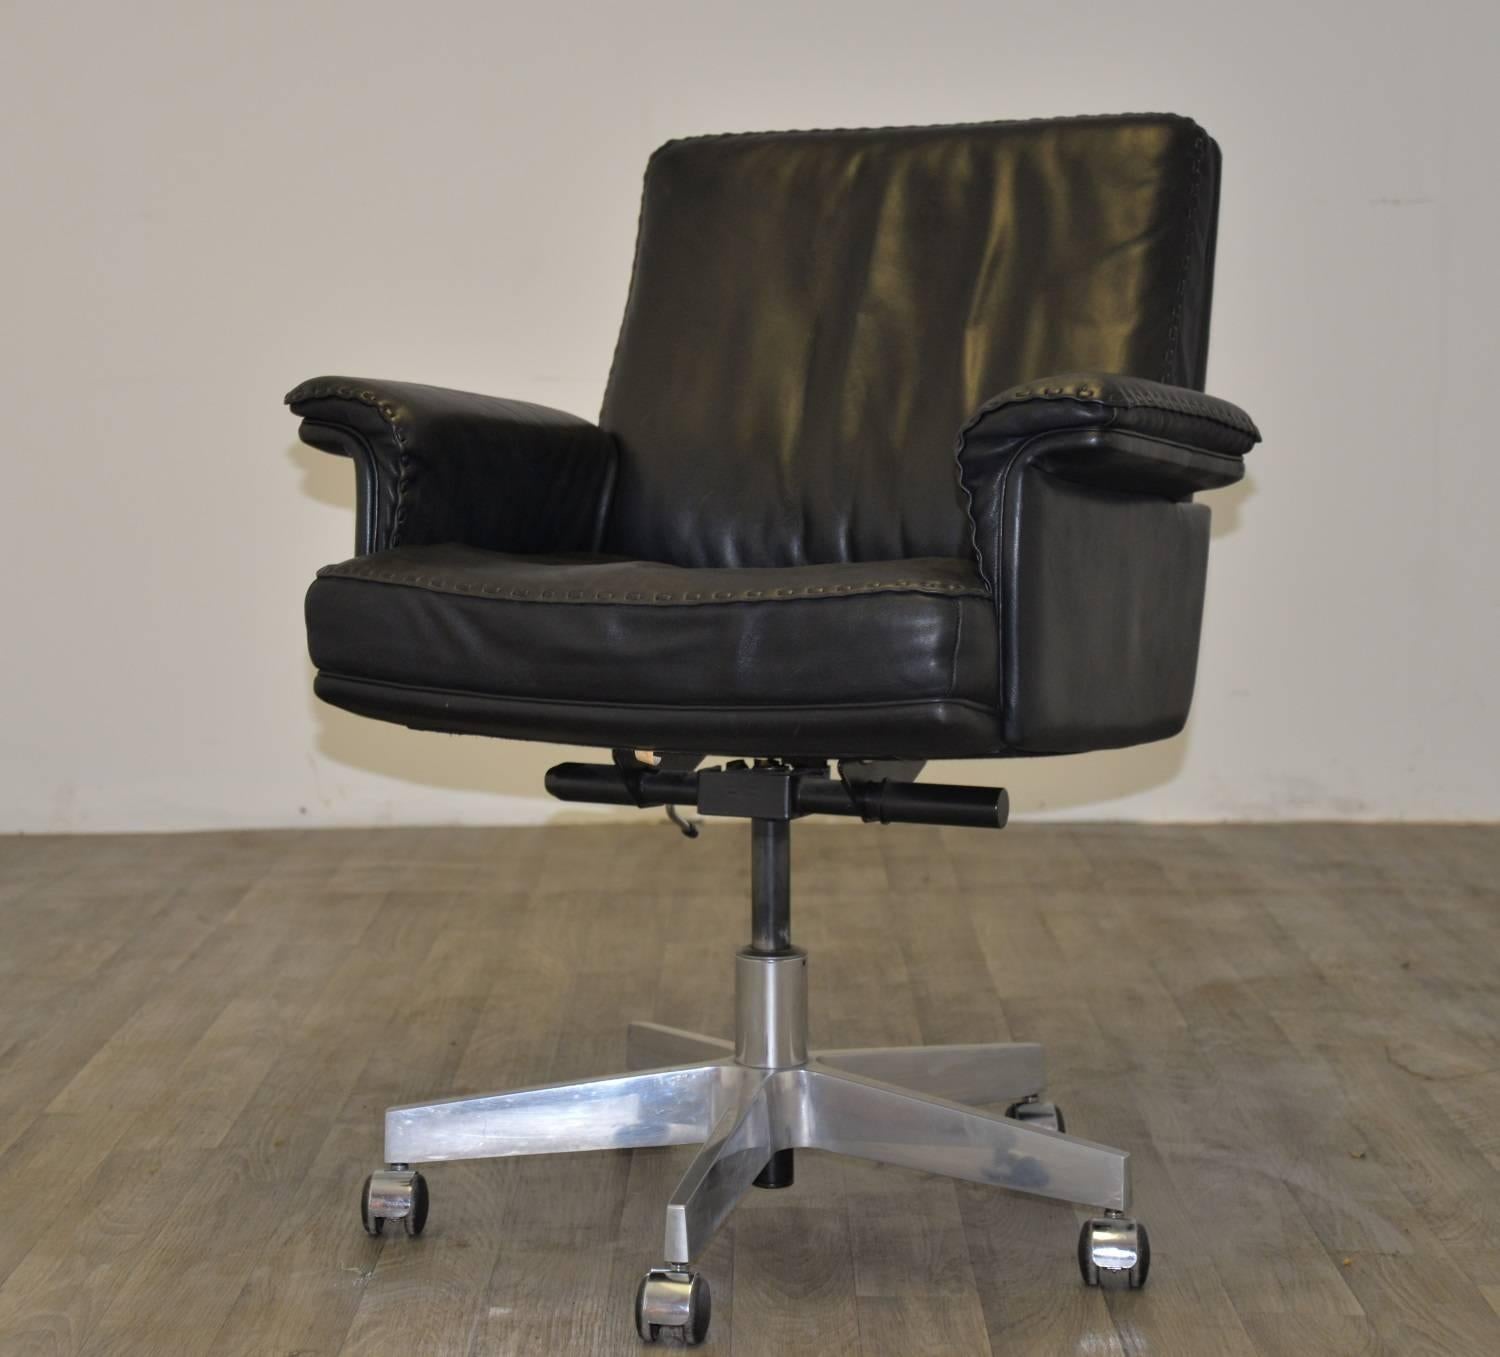 Competitive shipping rates for our US continent and European customers.
Try before you buy service for our UK mainland customers.
Returns accepted.

An extremely rare vintage De Sede DS 35 armchair on casters. Built to incredibly high standards